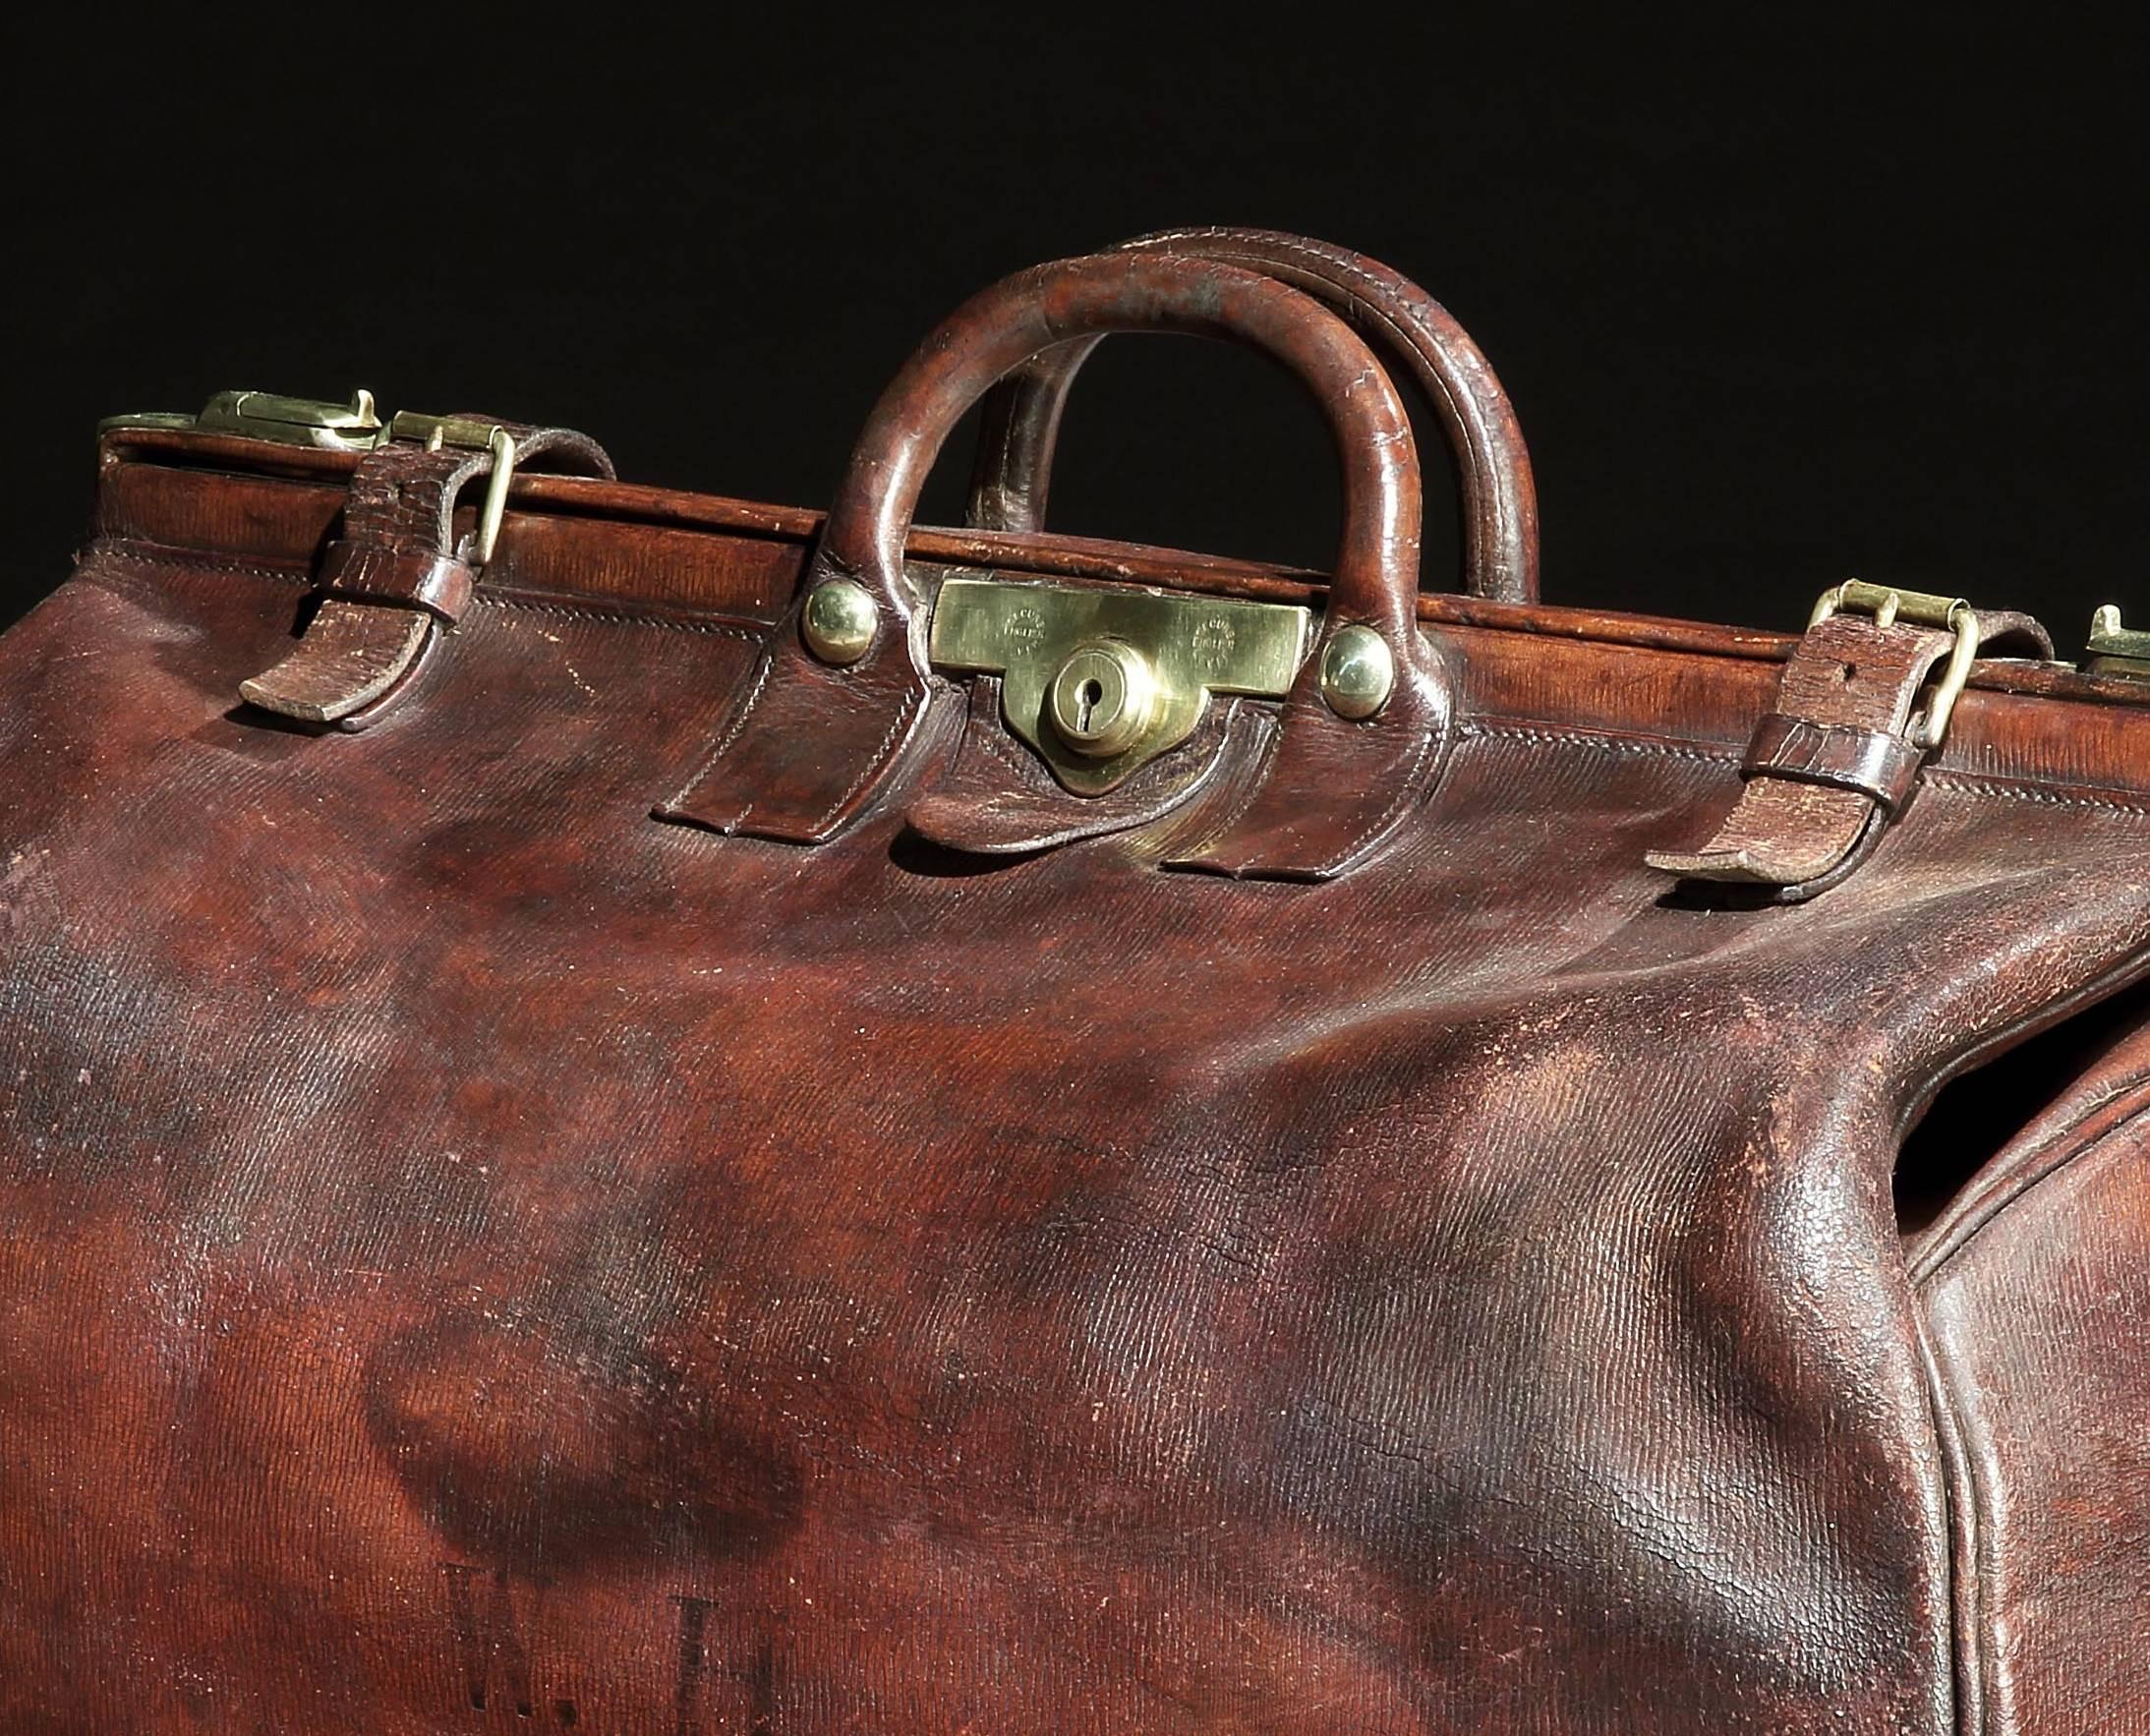 An incredibly large Edwardian, long-grain leather Gladstone bag, the deep glossy mahogany leather case with original straps, handle, buckles and secure English Lever locks, in incredibly good condition, the wide mouth locks open to reveal the